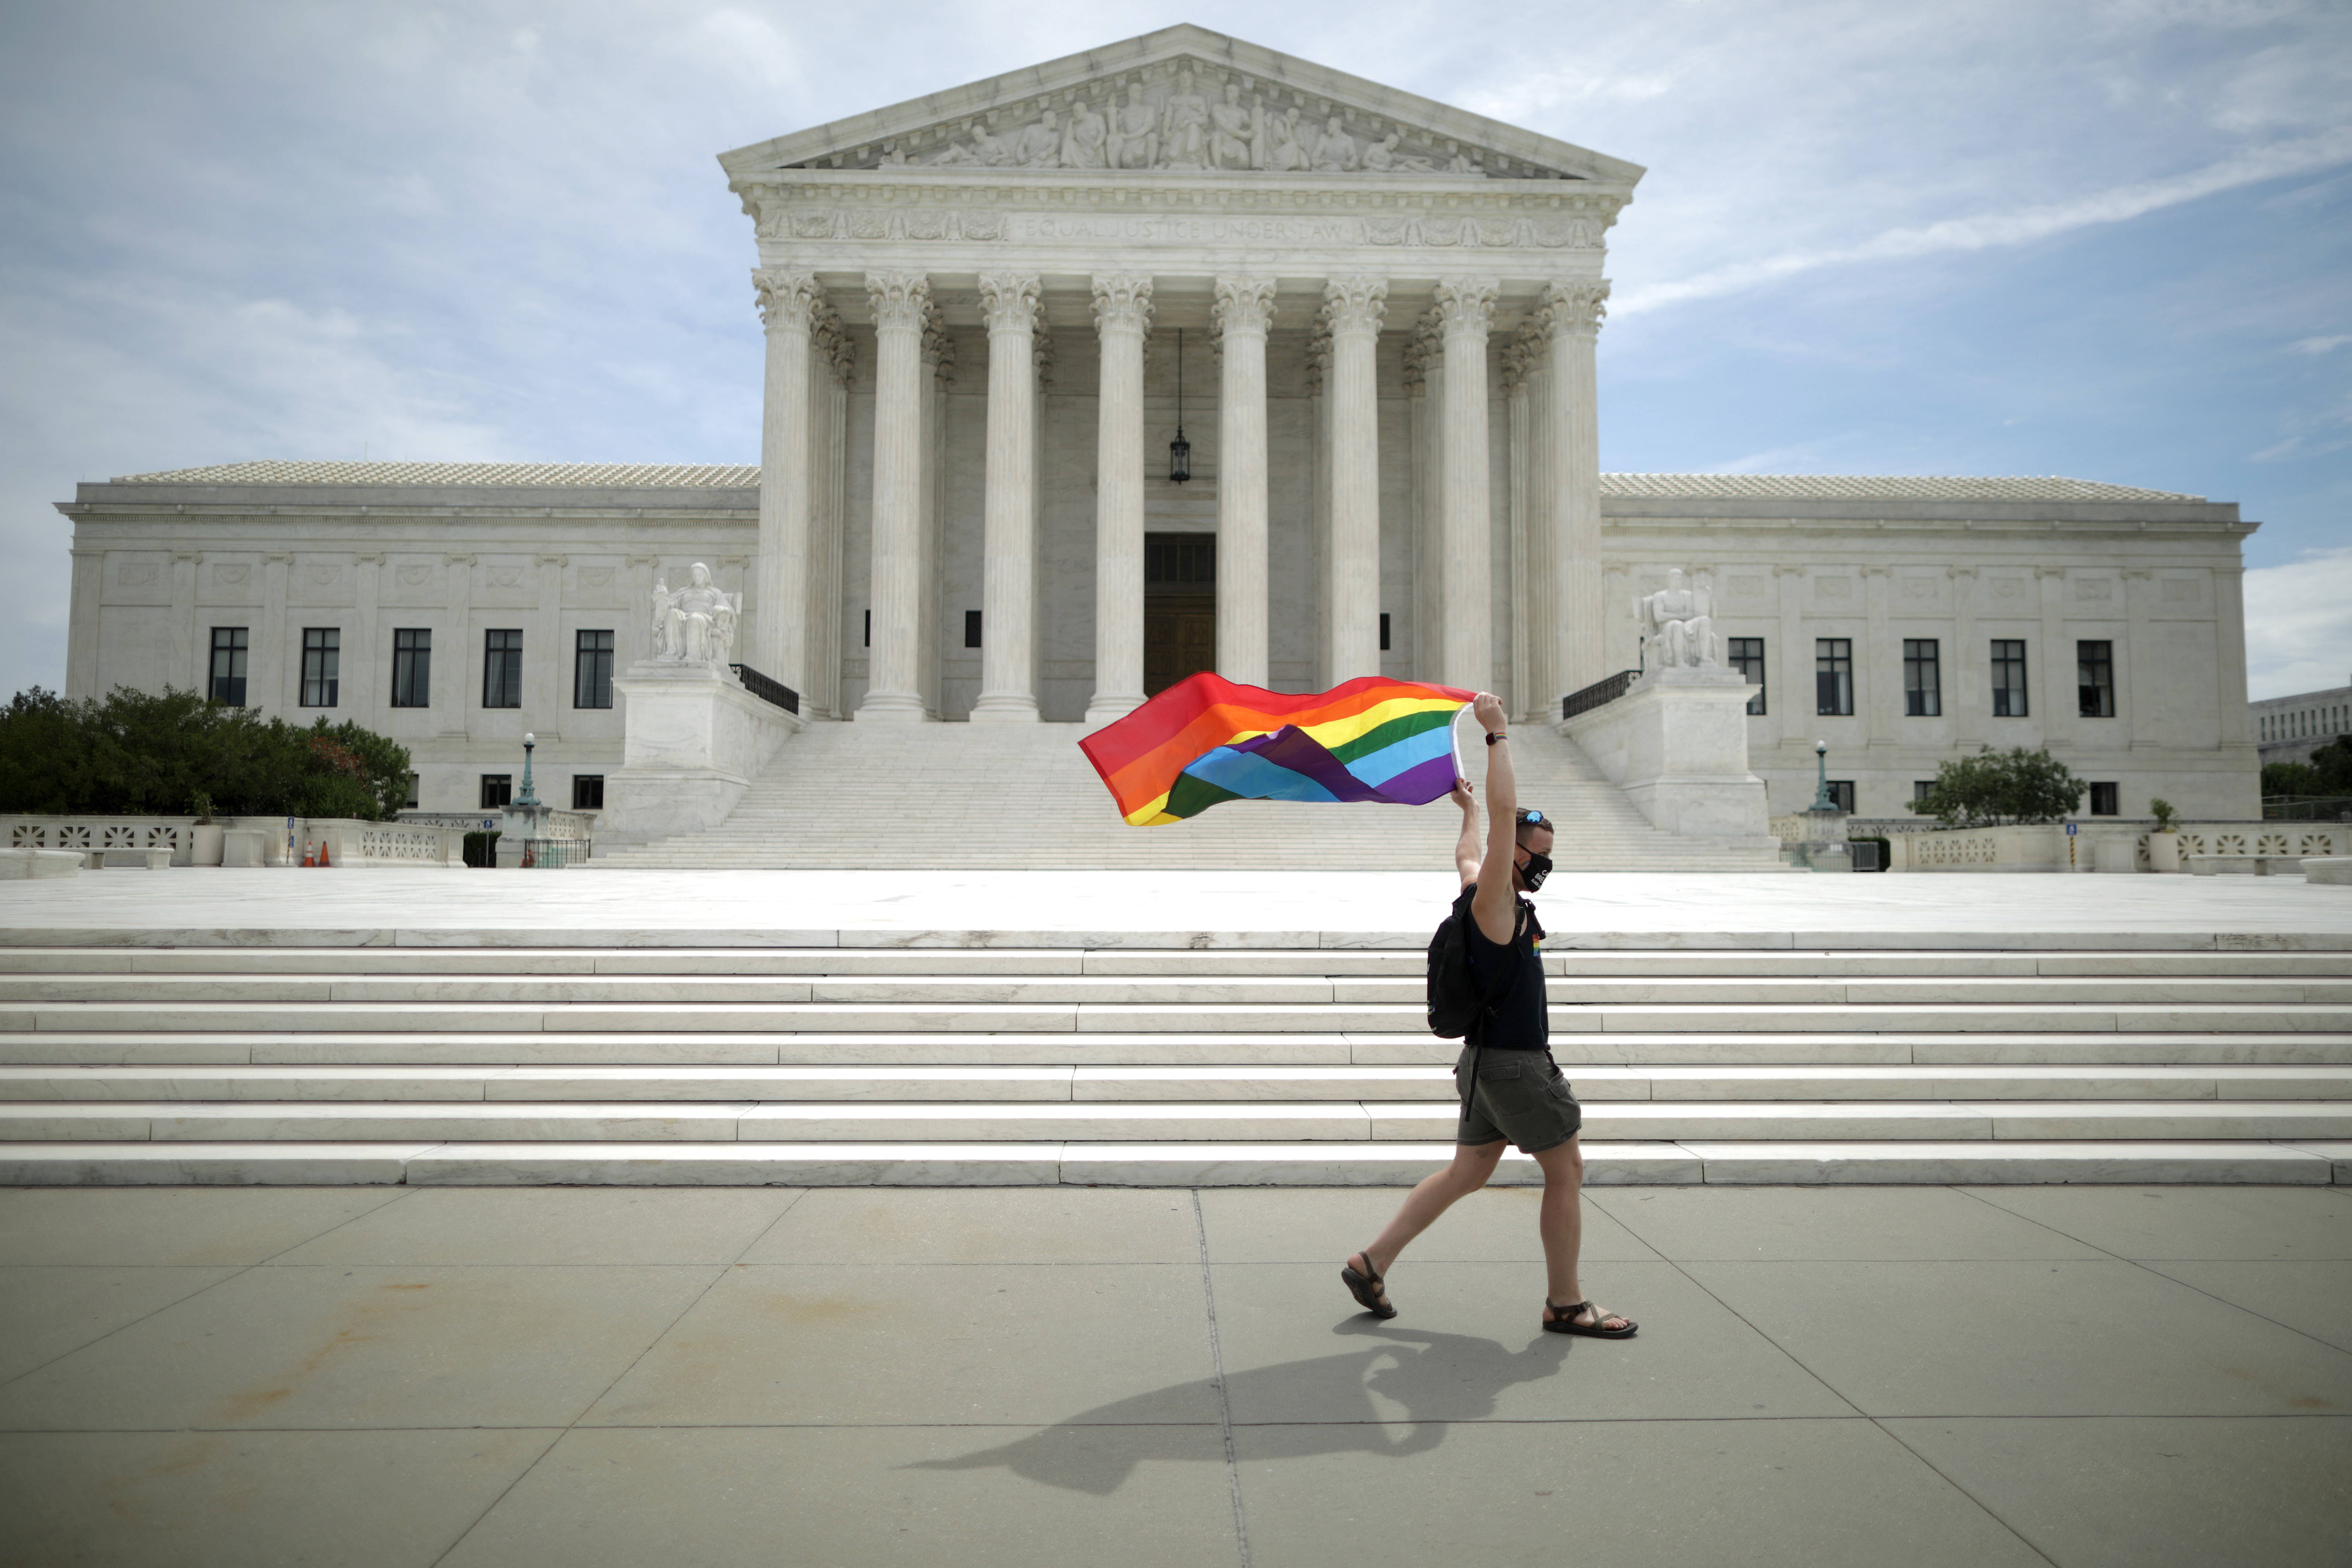 Joseph Fons walks back and forth in front of the U.S. Supreme Court on Monday after the court ruled to prevent LGBTQ employees from getting fired for their orientation or gender identity. (Chip Somodevilla/Getty Images)